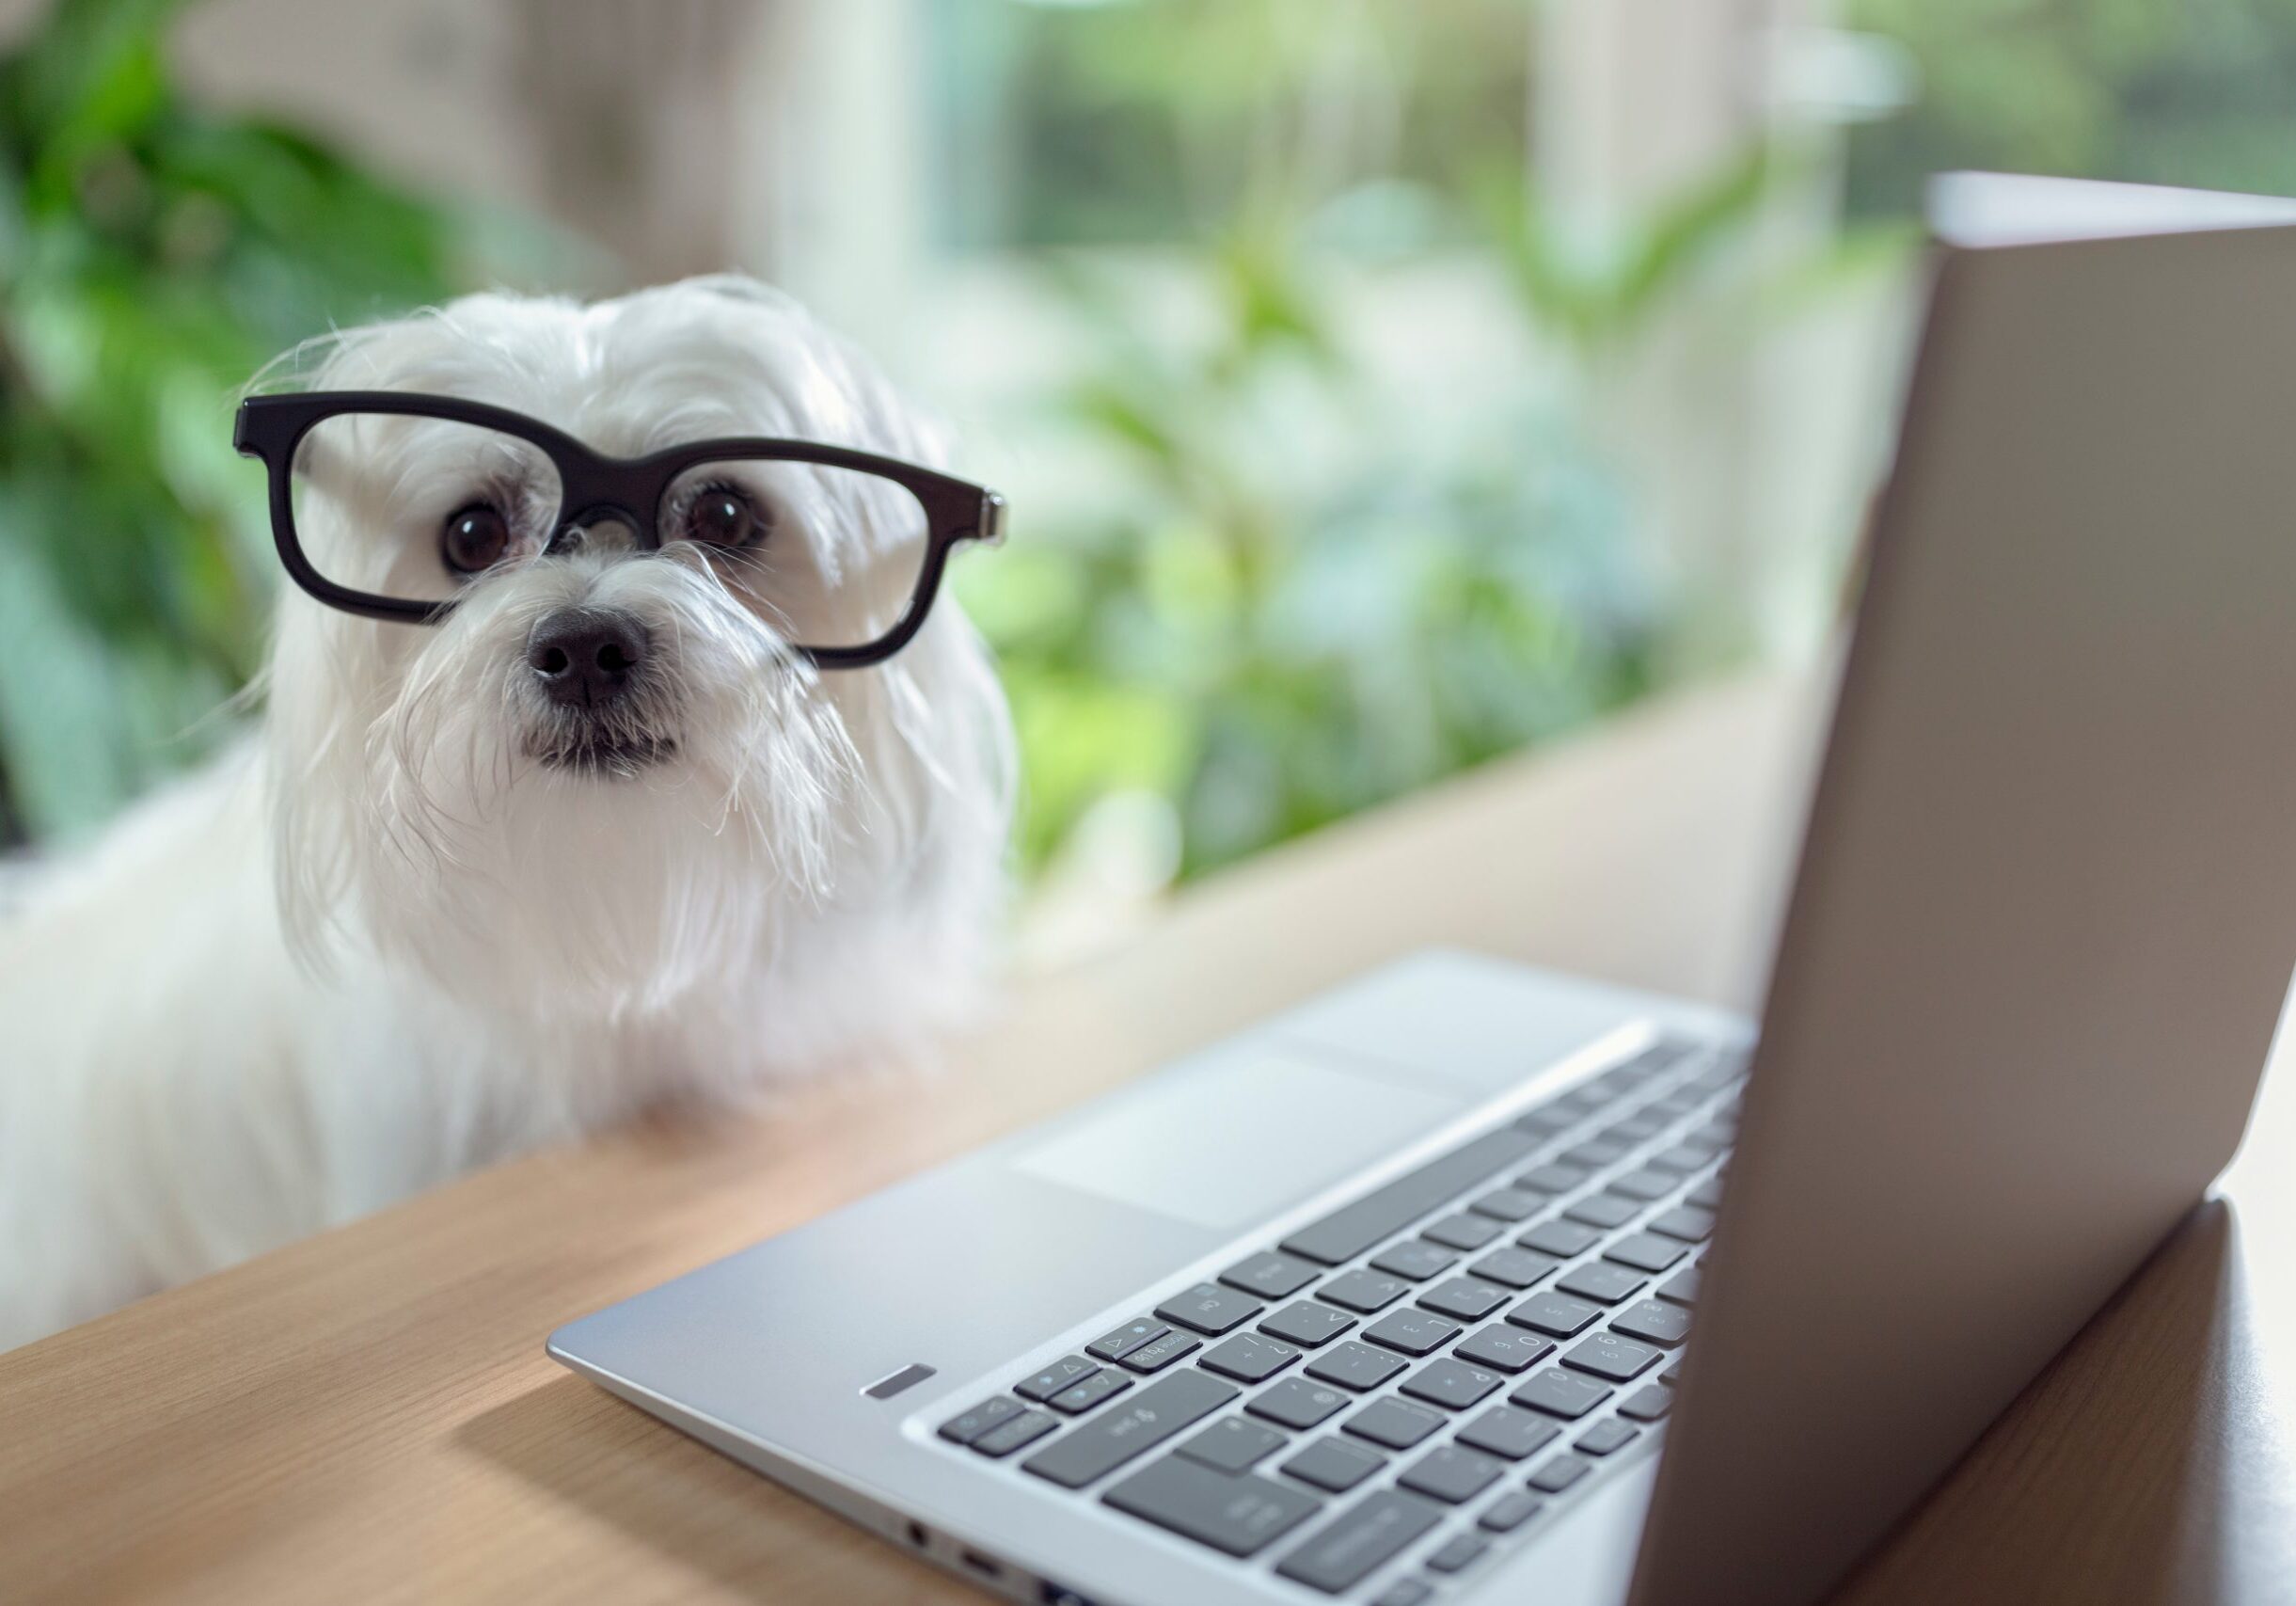 Dog with glasses using laptop computer